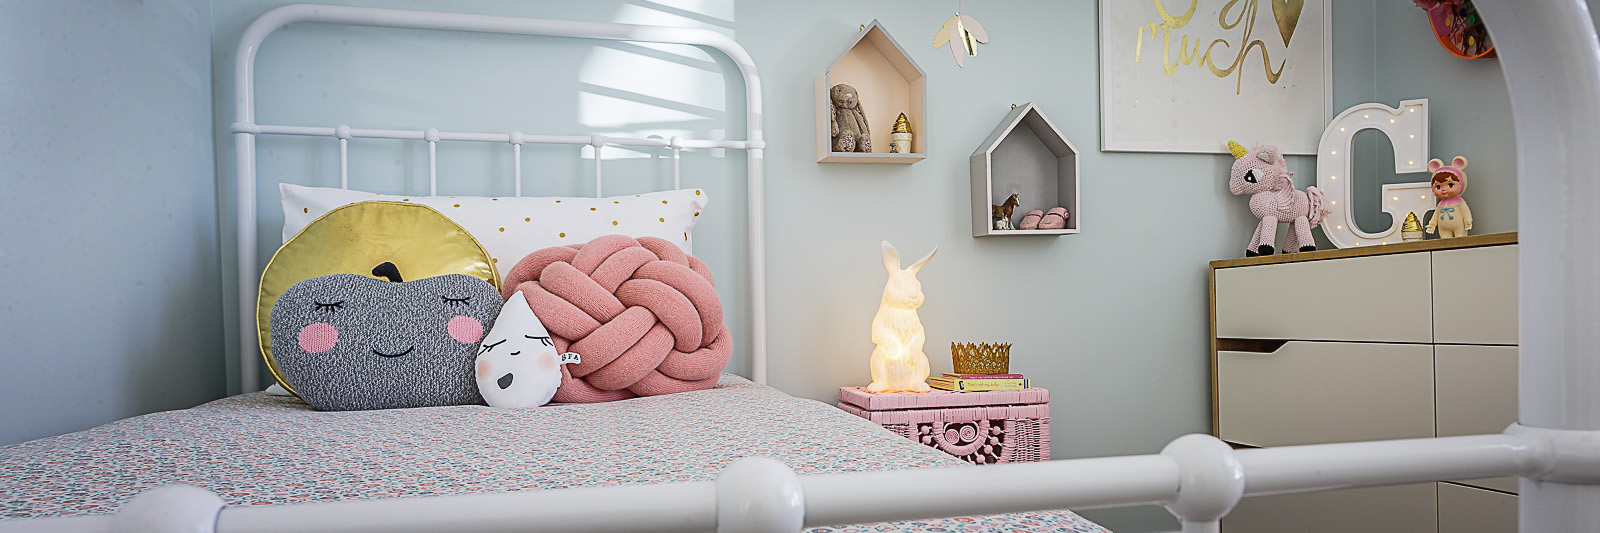 Present Your Kids A Beautifully Well-Decorated Room